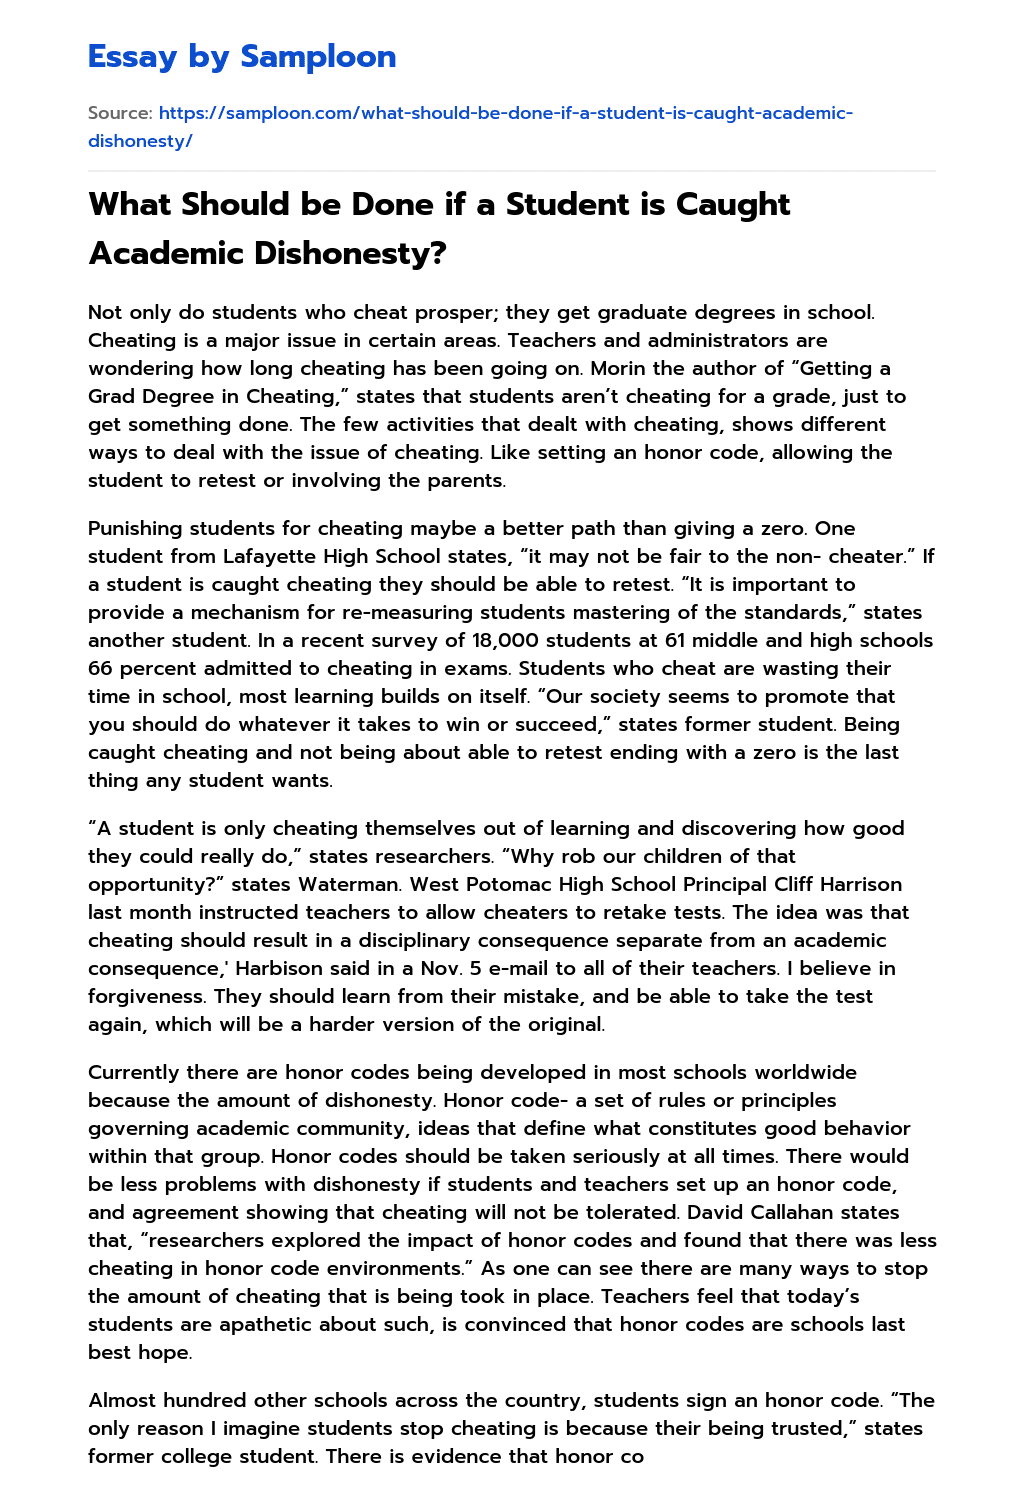 What Should be Done if a Student is Caught Academic Dishonesty? essay